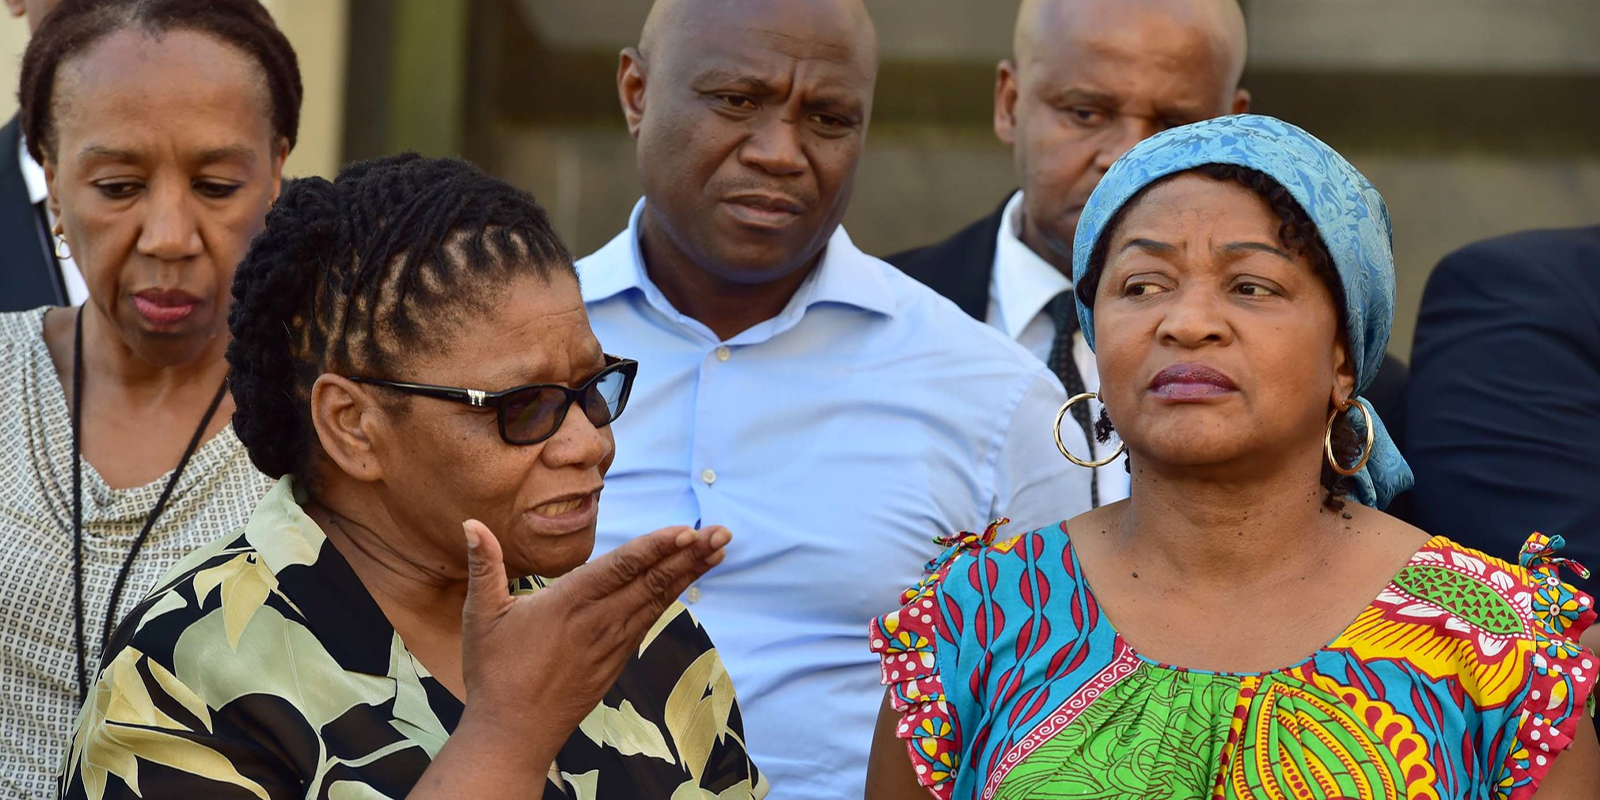 Defence Minister Thandi Modise’s Dangerous Dance with Putin